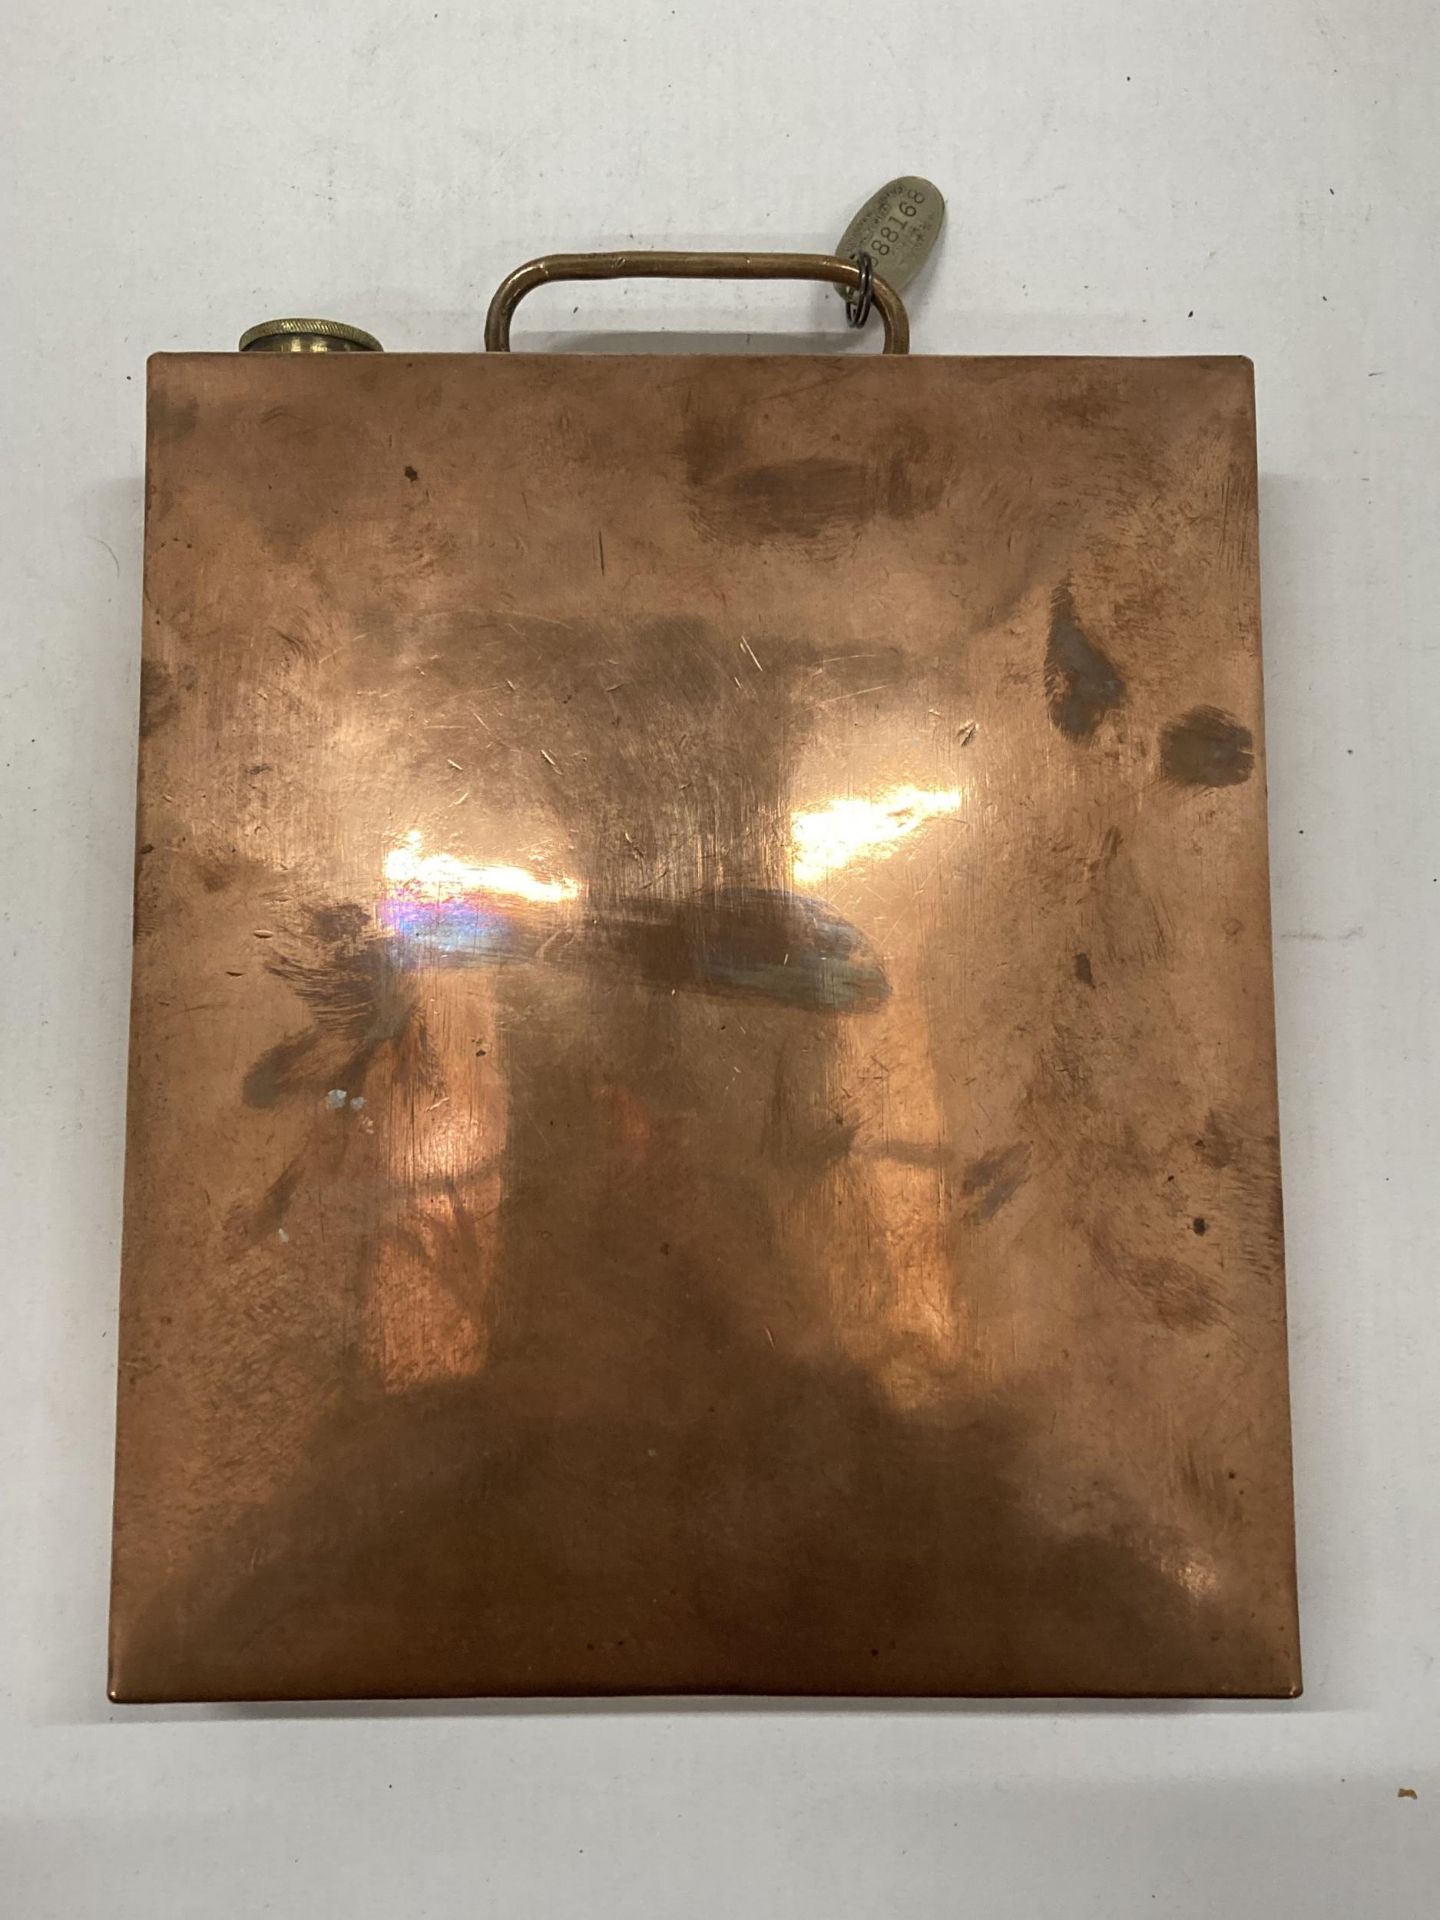 A VINTAGE COPPER CAR WATER BOTTLE WITH RETURN TO OWNER TAG